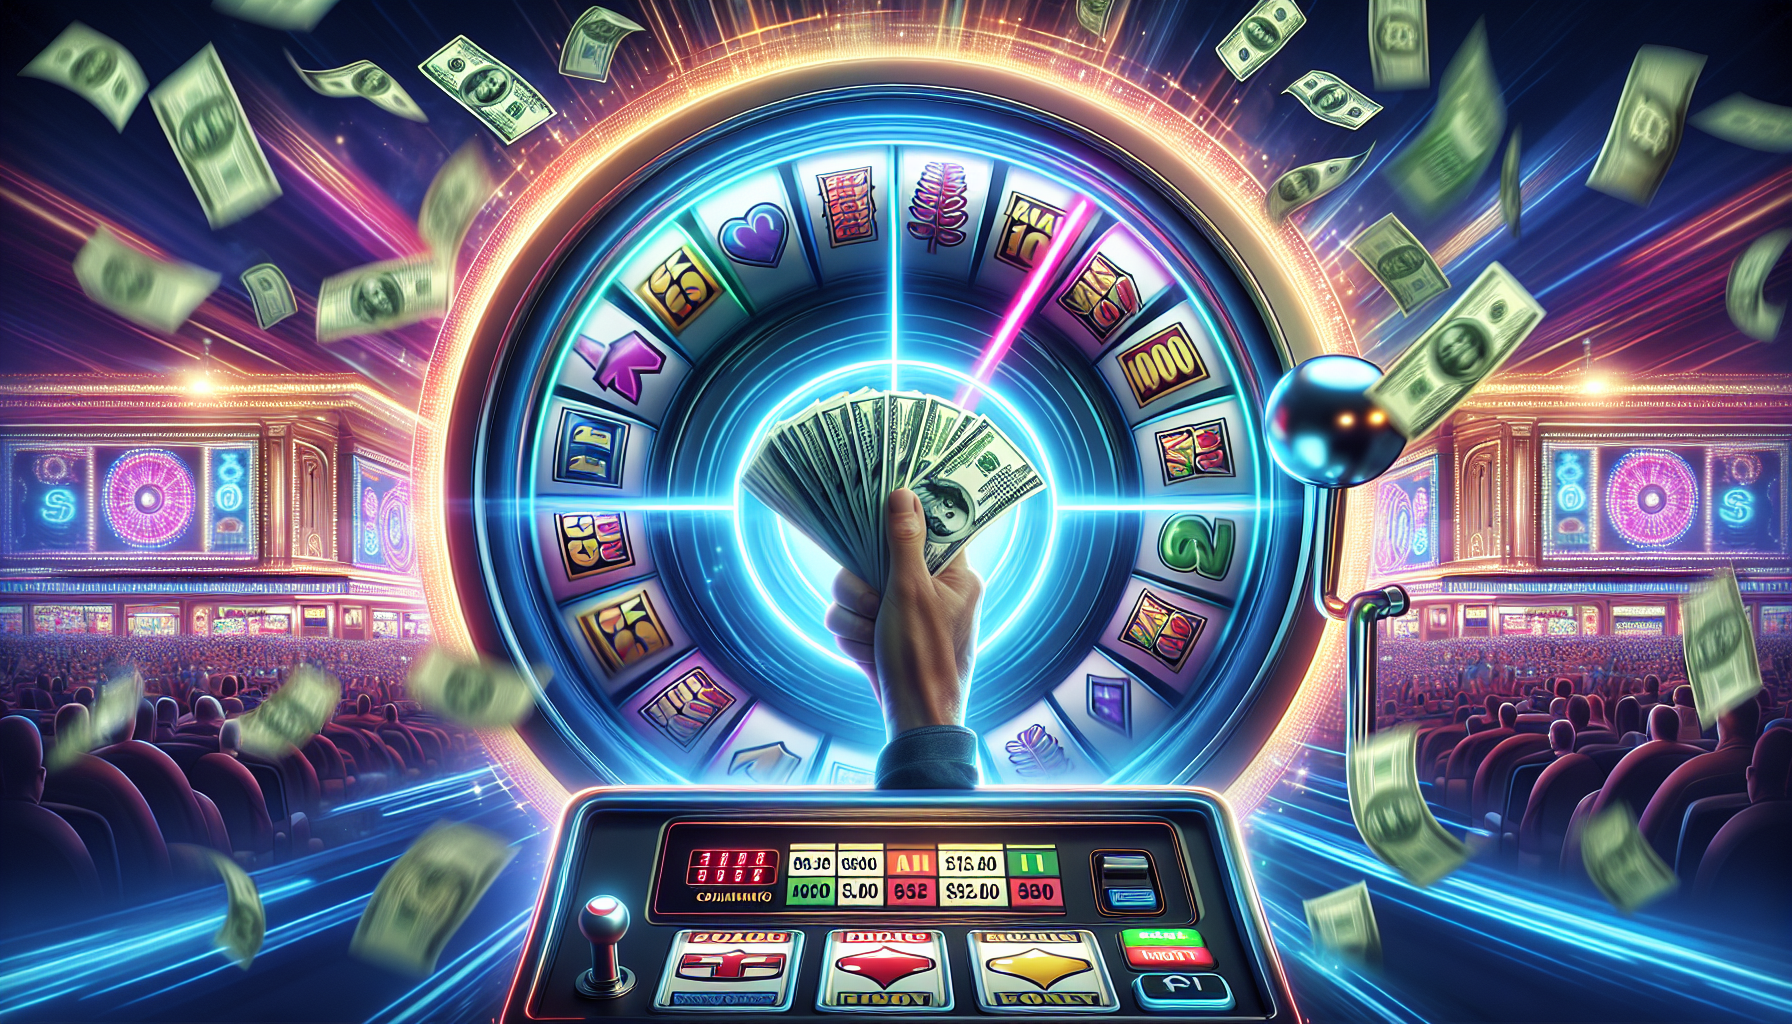 Is There Any Slot Game That Pays Real Money?